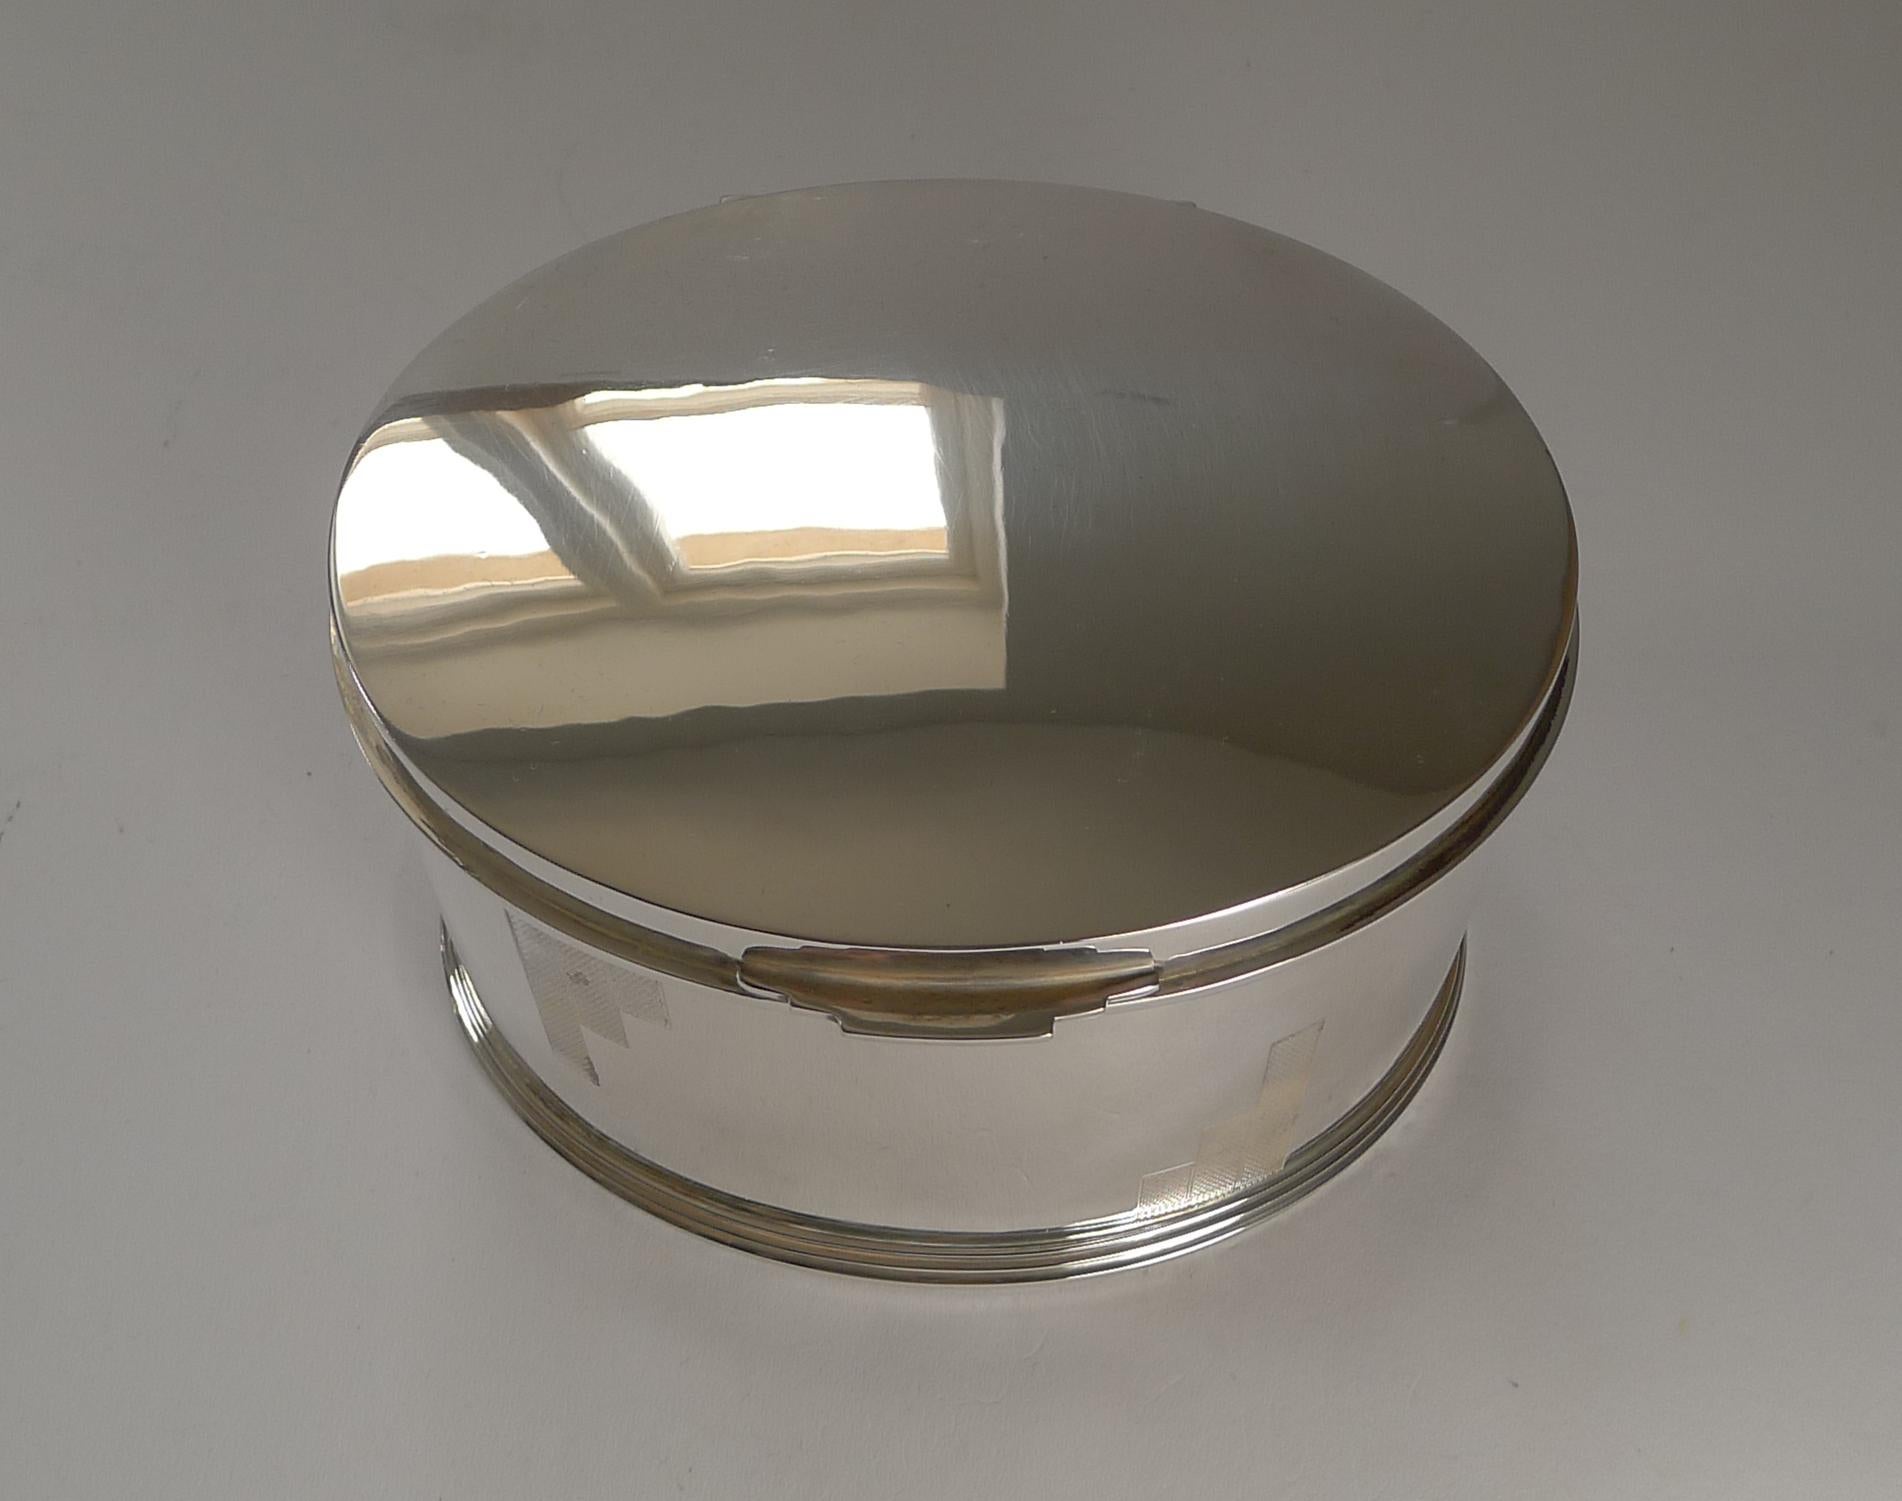 English Art Deco Silver Plated Biscuit Box by Mappin and Webb, c.1925